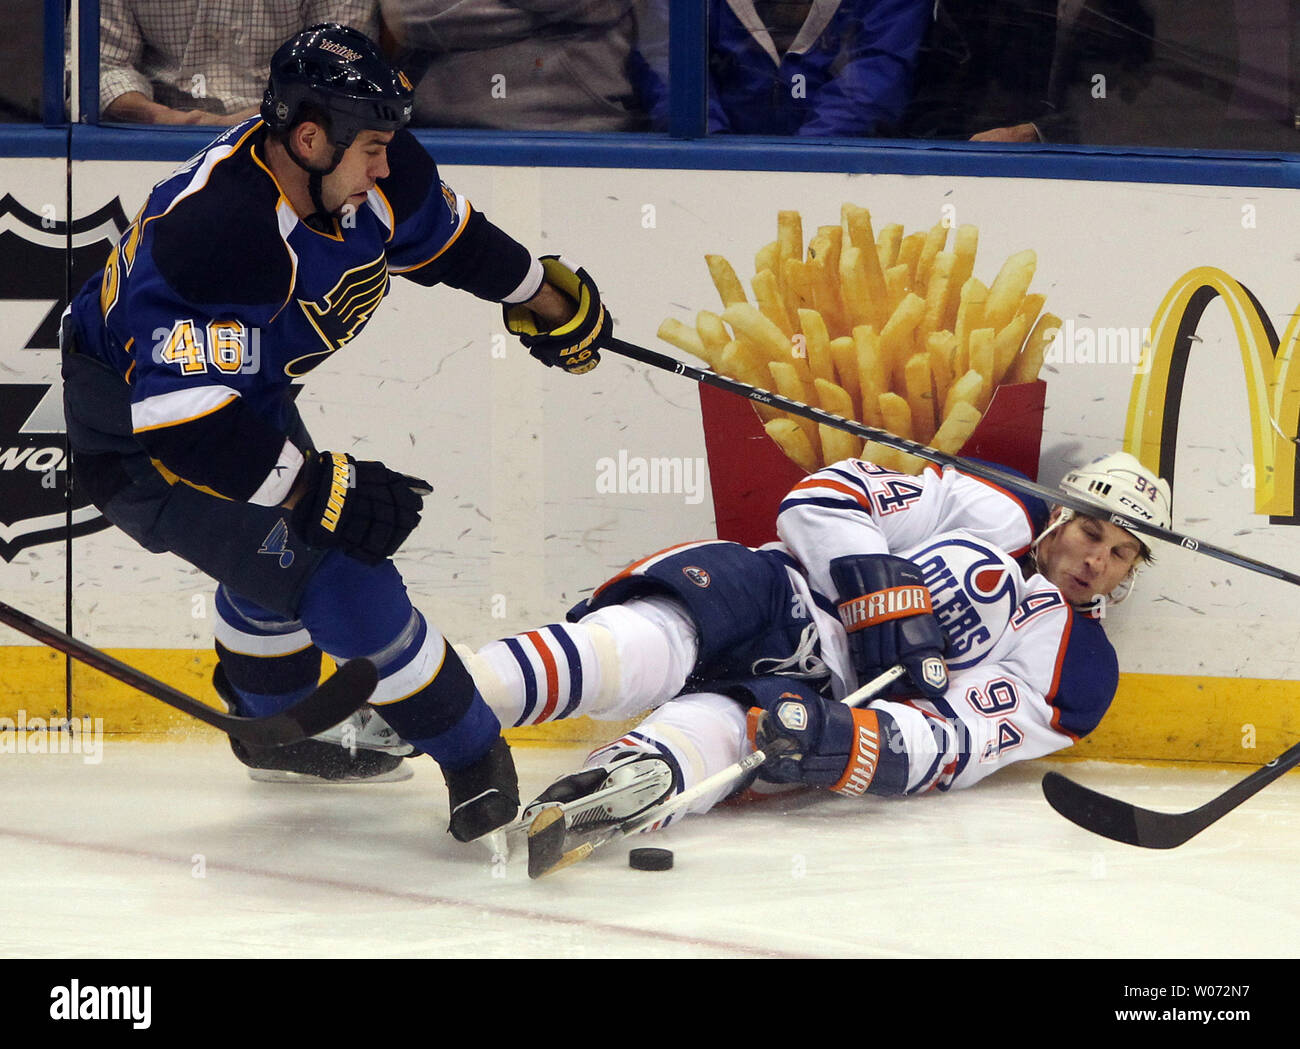 Ryan Smyth of the Edmonton Oilers awaits a face off against the News  Photo - Getty Images